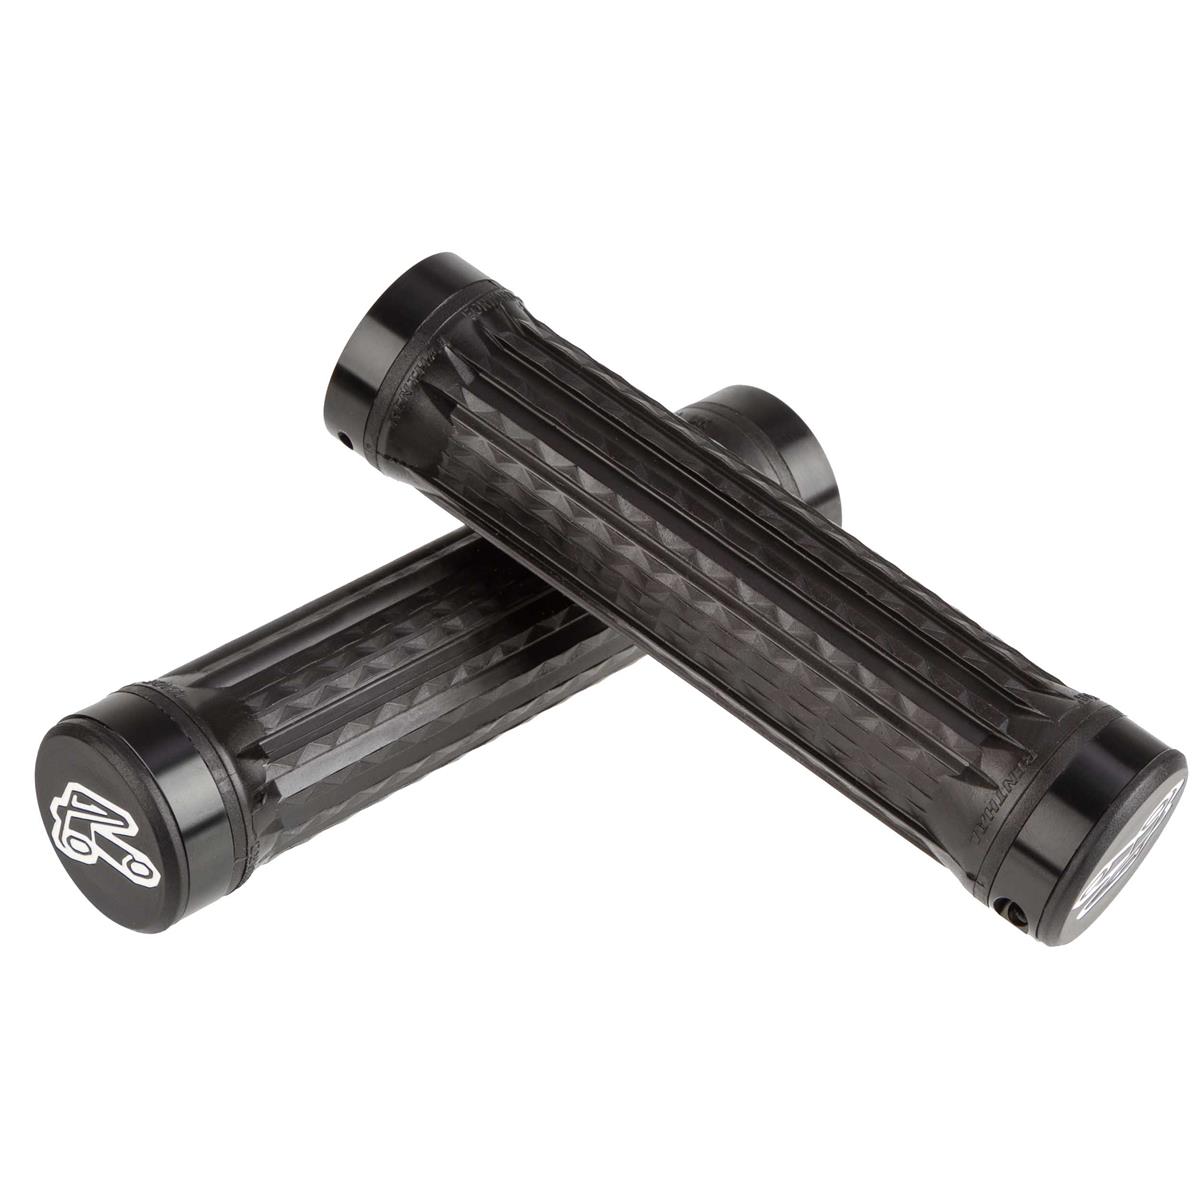 Renthal MTB Grips Traction Lock-On Black, Ultra Tacky